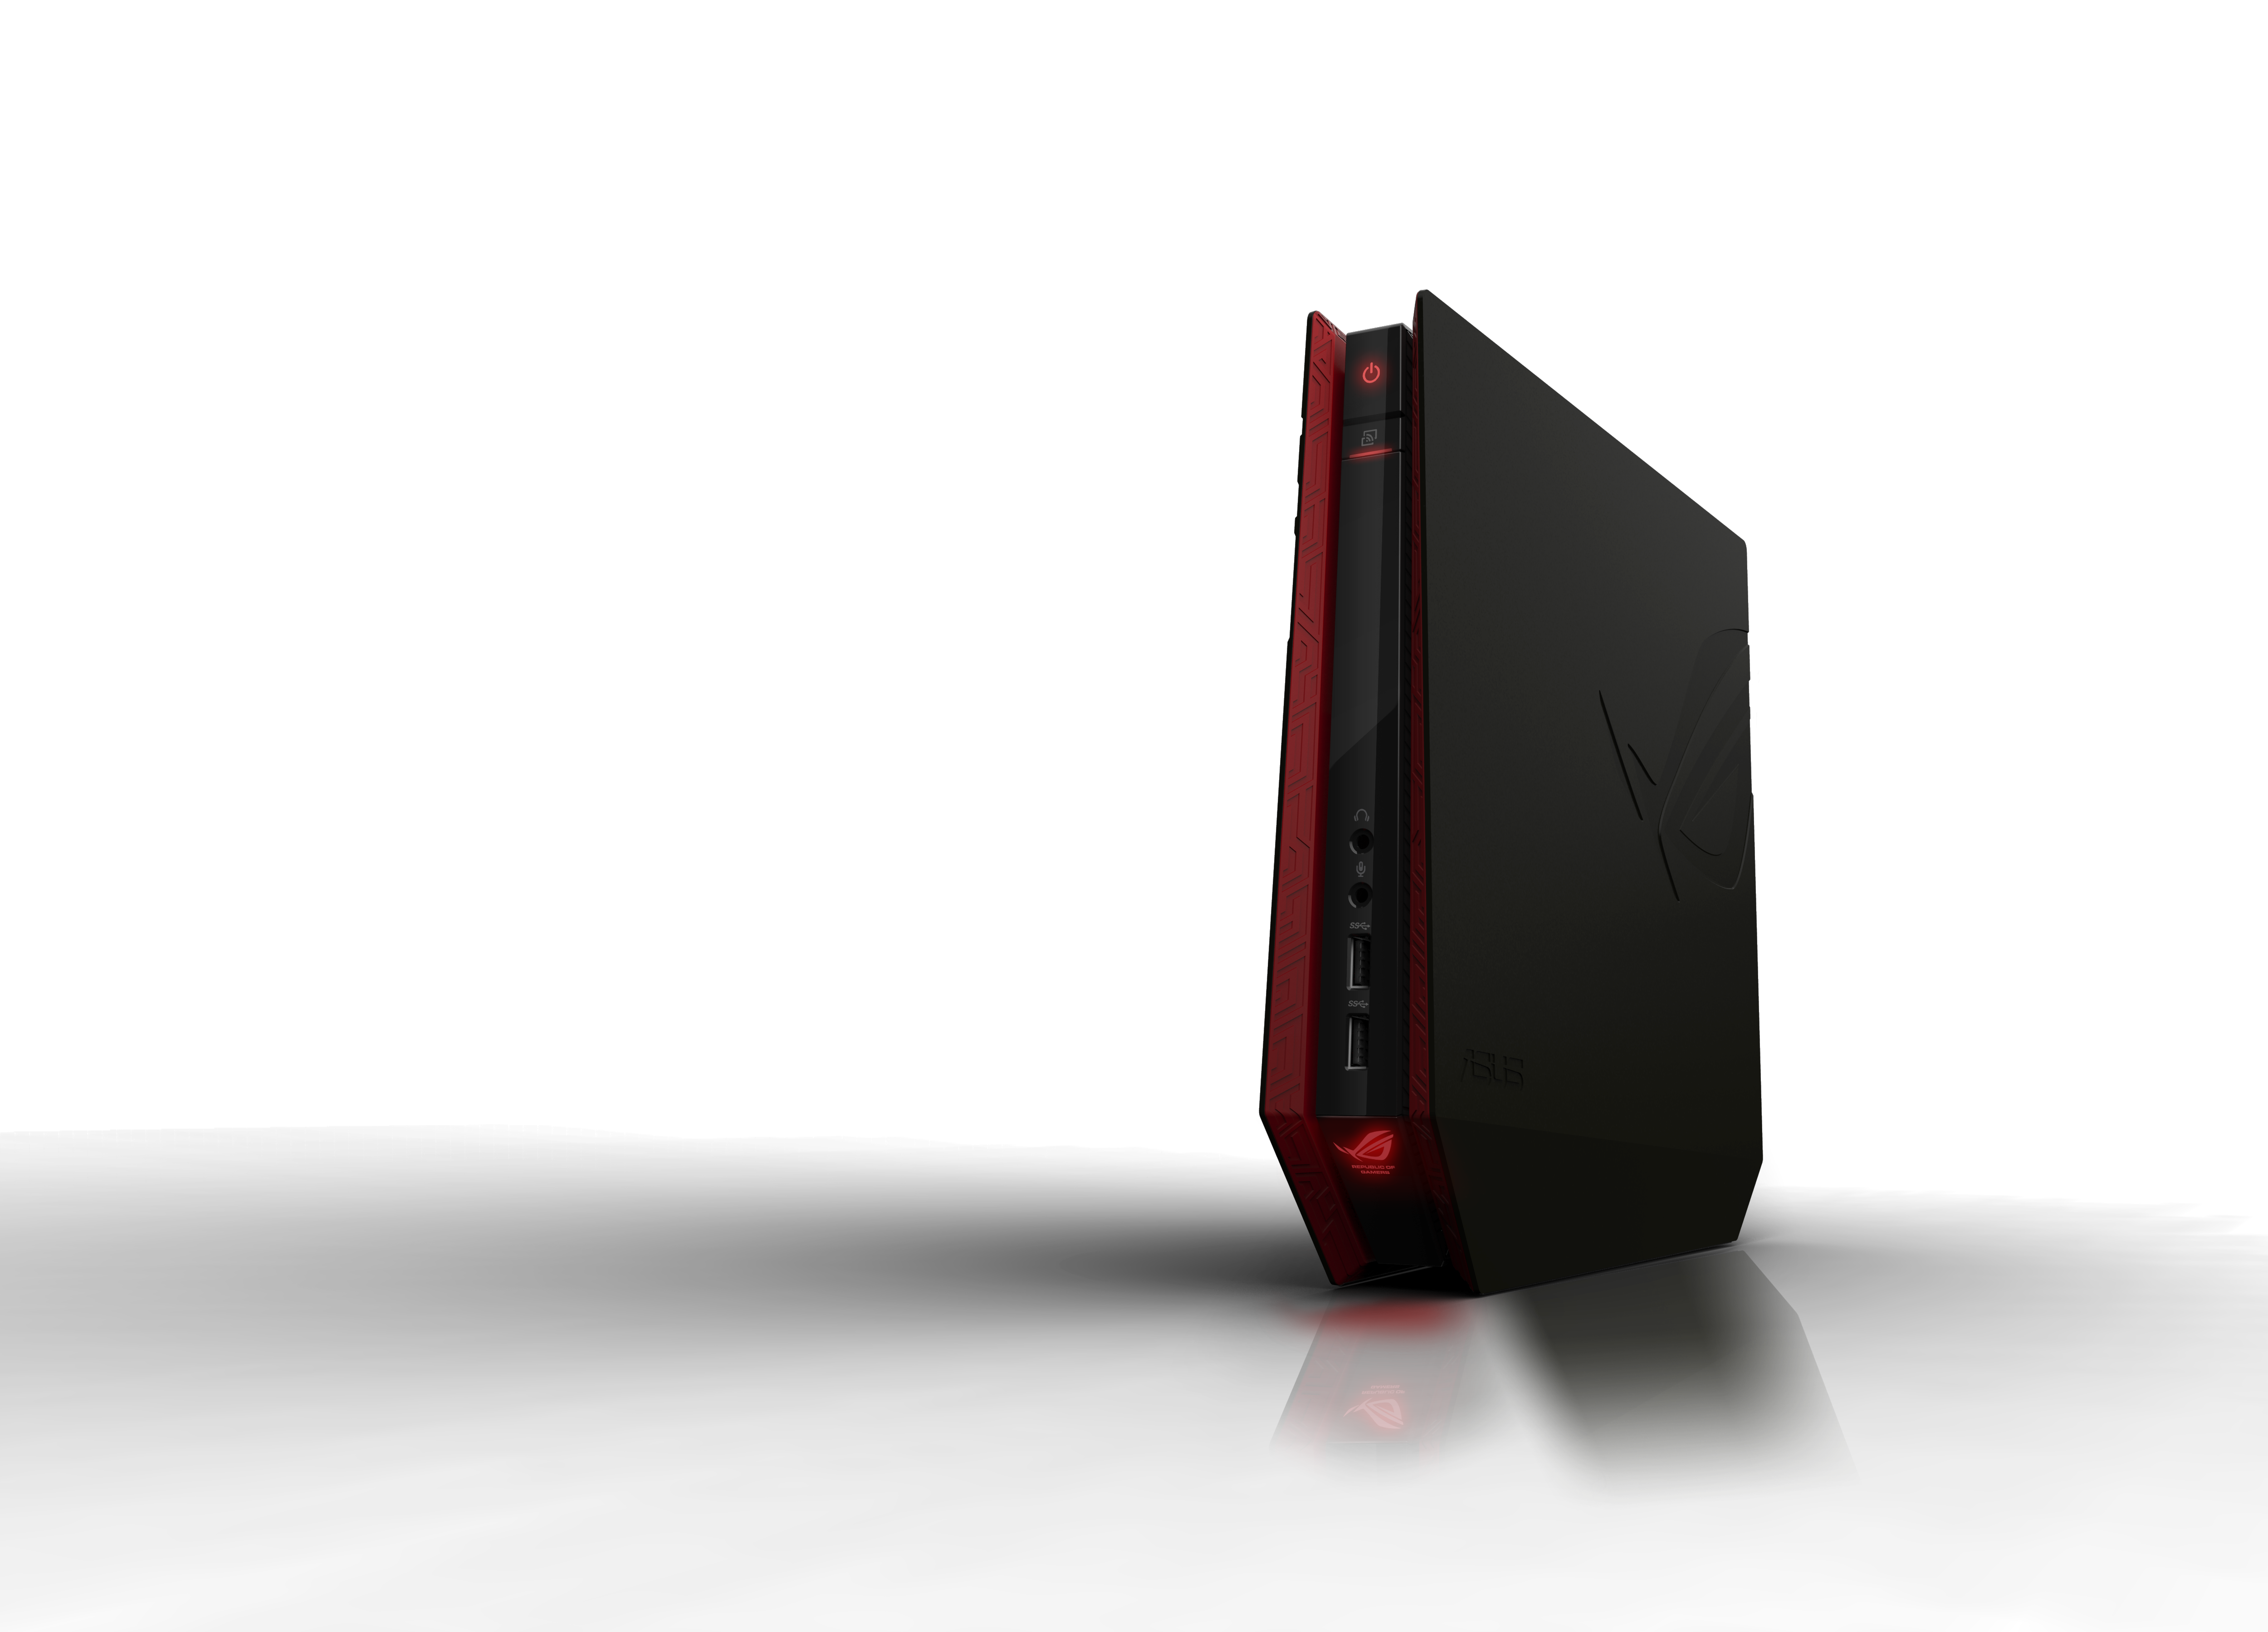 ASUS Launches Two SFF PCs: The G20 PC and the GR8 'Console'